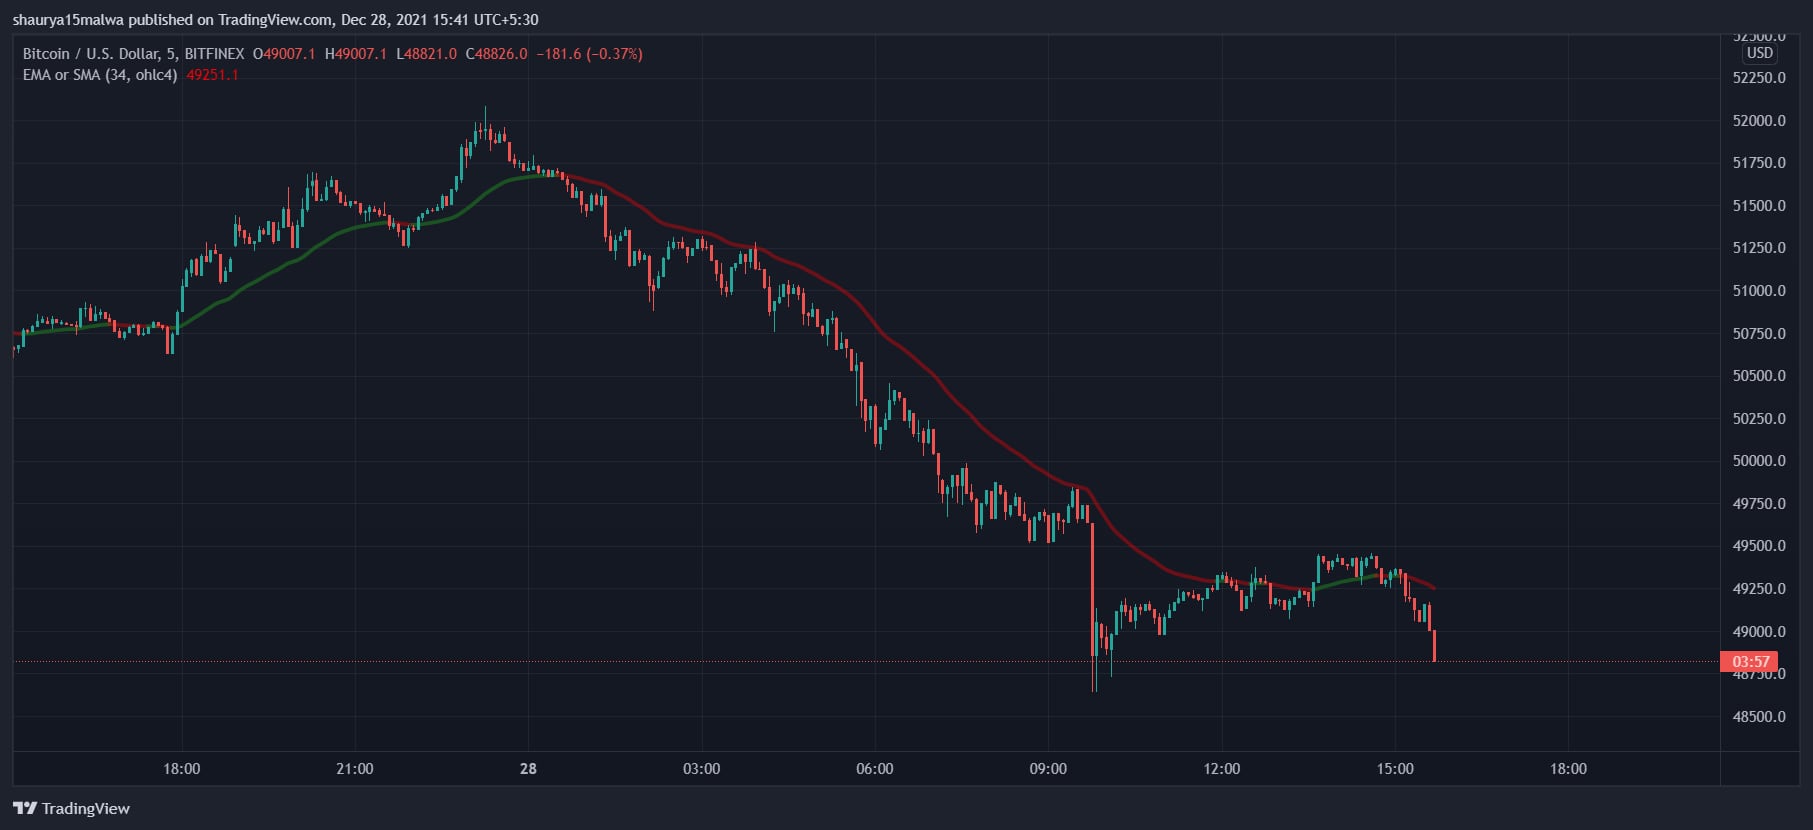 Bitcoin prices fell nearly $3,000 since Monday before seeing a brief uptrend to $49,500. (TradingView)